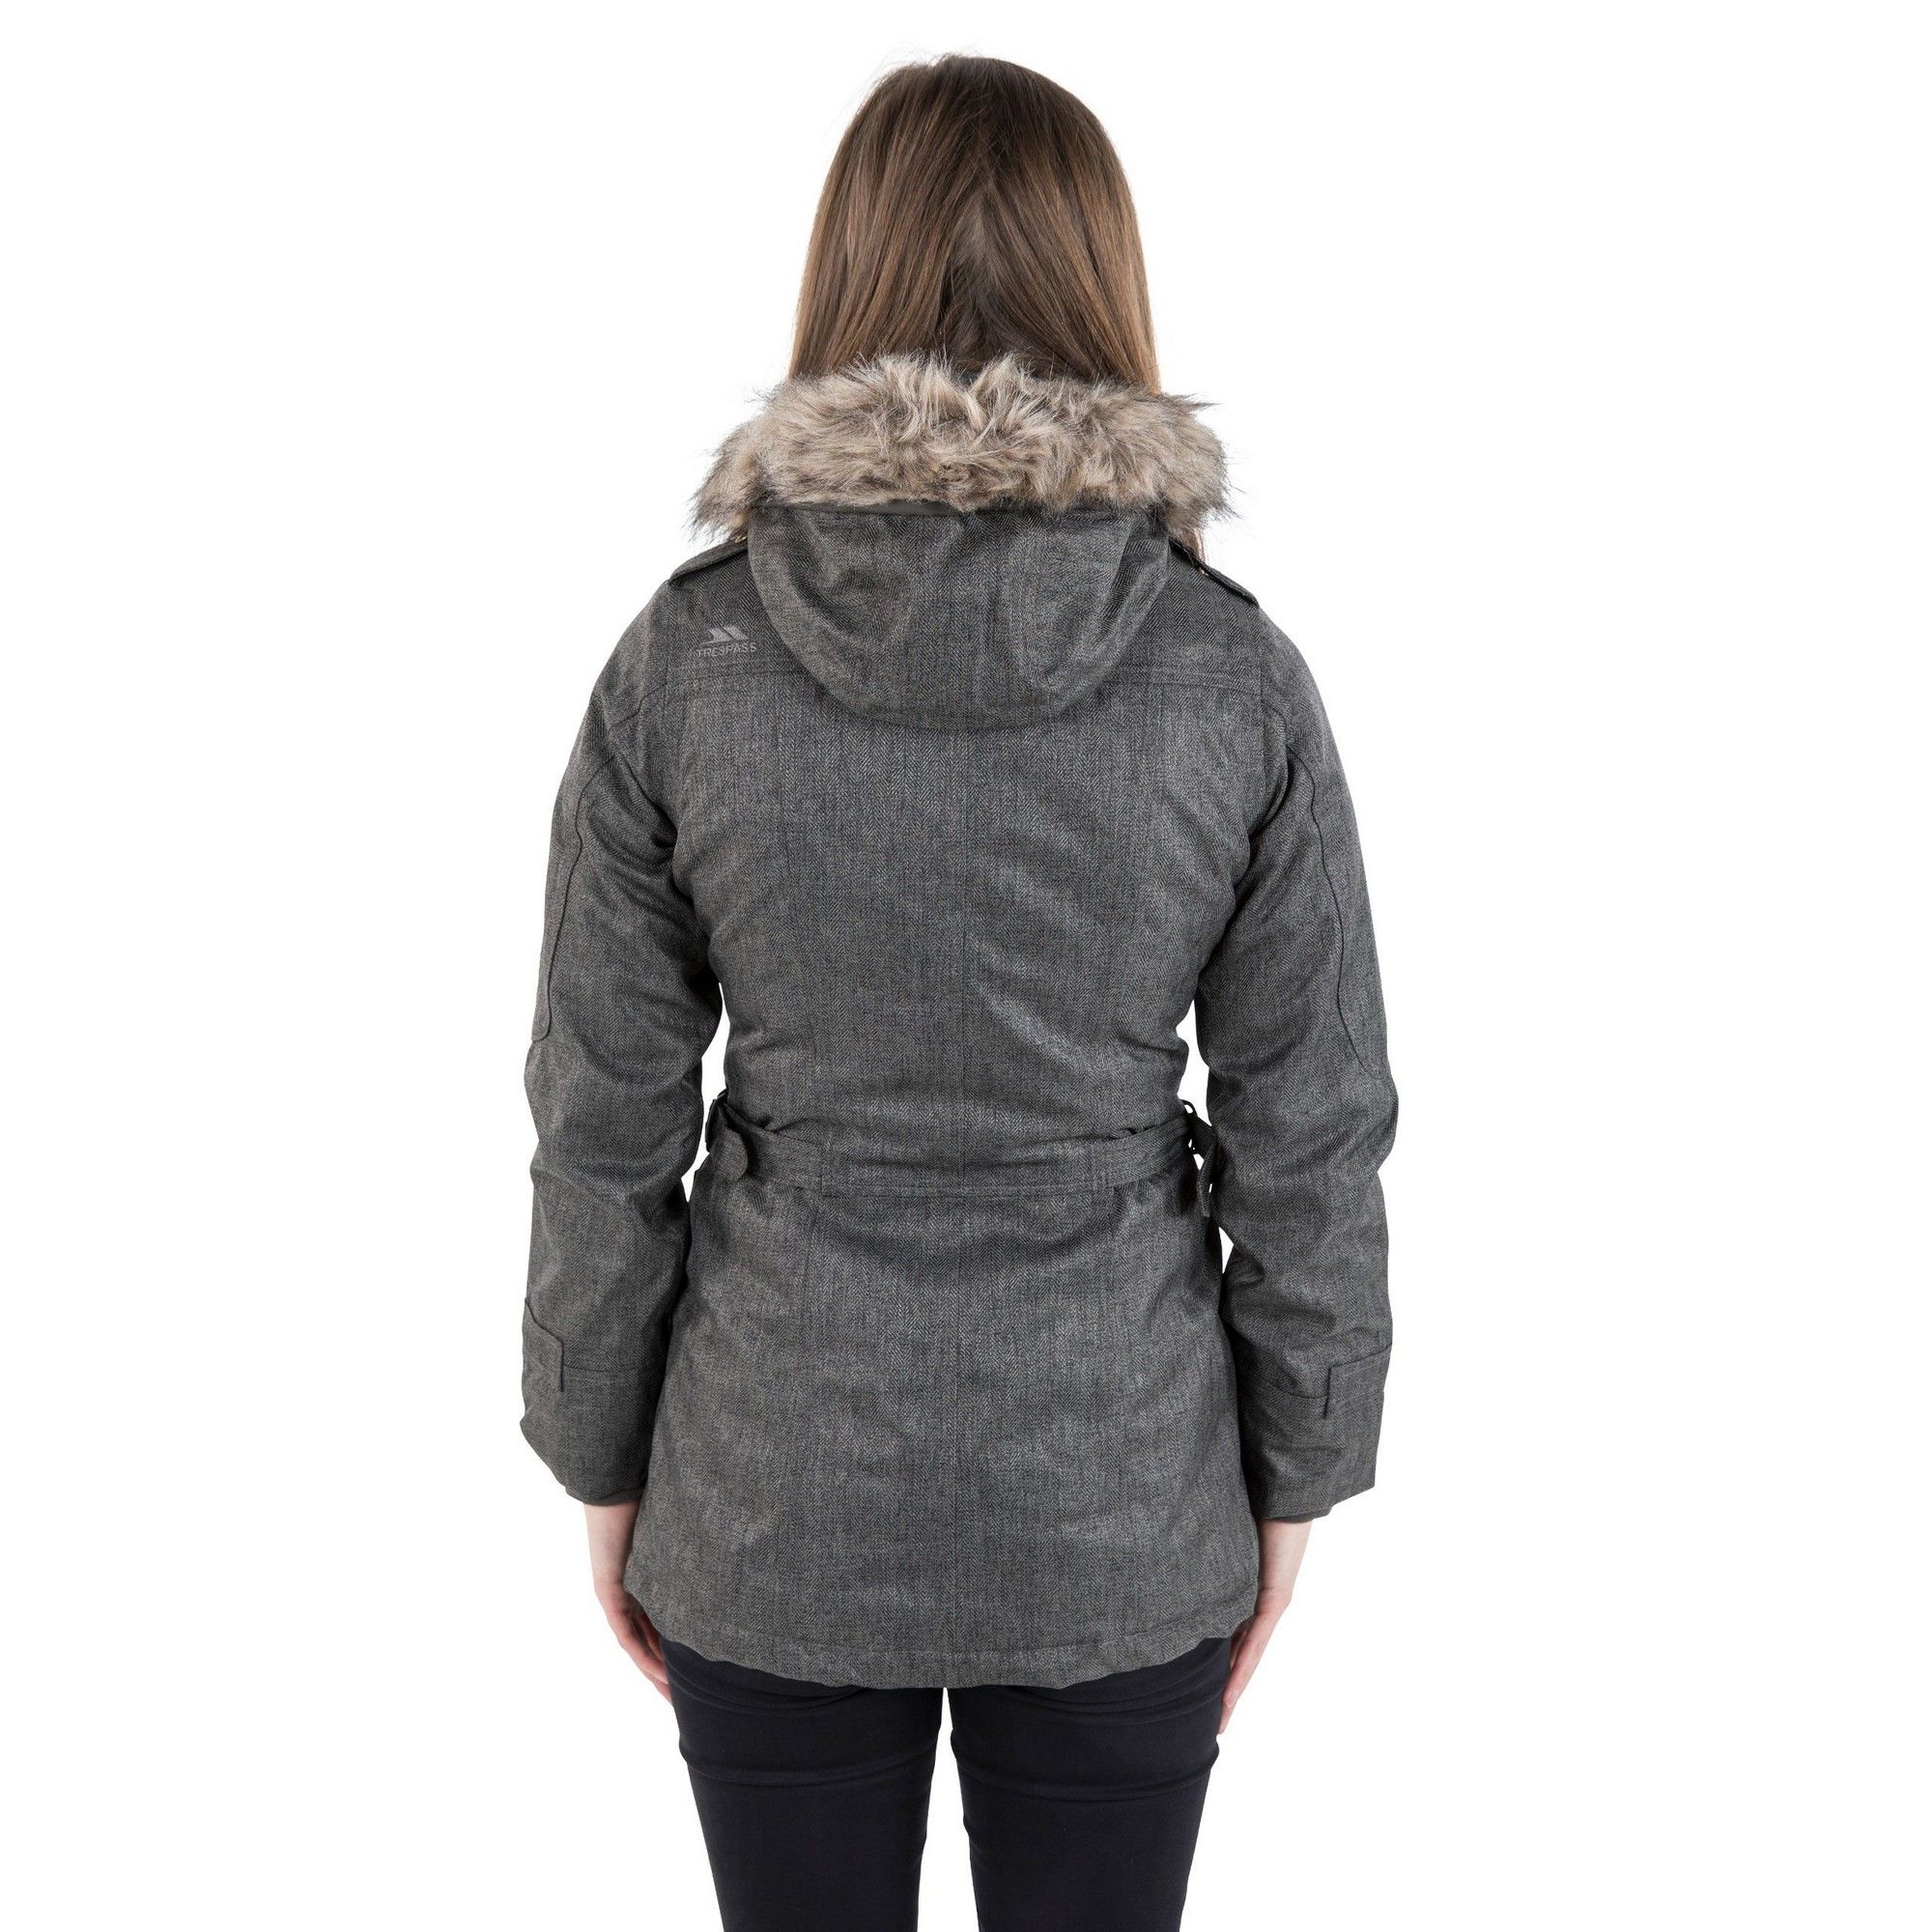 Padded. Textured fabric. Contrast linings. Adjustable zip off hood. Removable fake fur hood trim. 2 zip pockets. Adjustable waist tabs. Inner knitted cuff. Inner storm flap. Waterproof 3000mm, windproof, taped seams. Shell: 100% Polyester, TPU membrane, Lining: 100% Polyester, Filling: 100% Polyester. Trespass Womens Chest Sizing (approx): XS/8 - 32in/81cm, S/10 - 34in/86cm, M/12 - 36in/91.4cm, L/14 - 38in/96.5cm, XL/16 - 40in/101.5cm, XXL/18 - 42in/106.5cm.